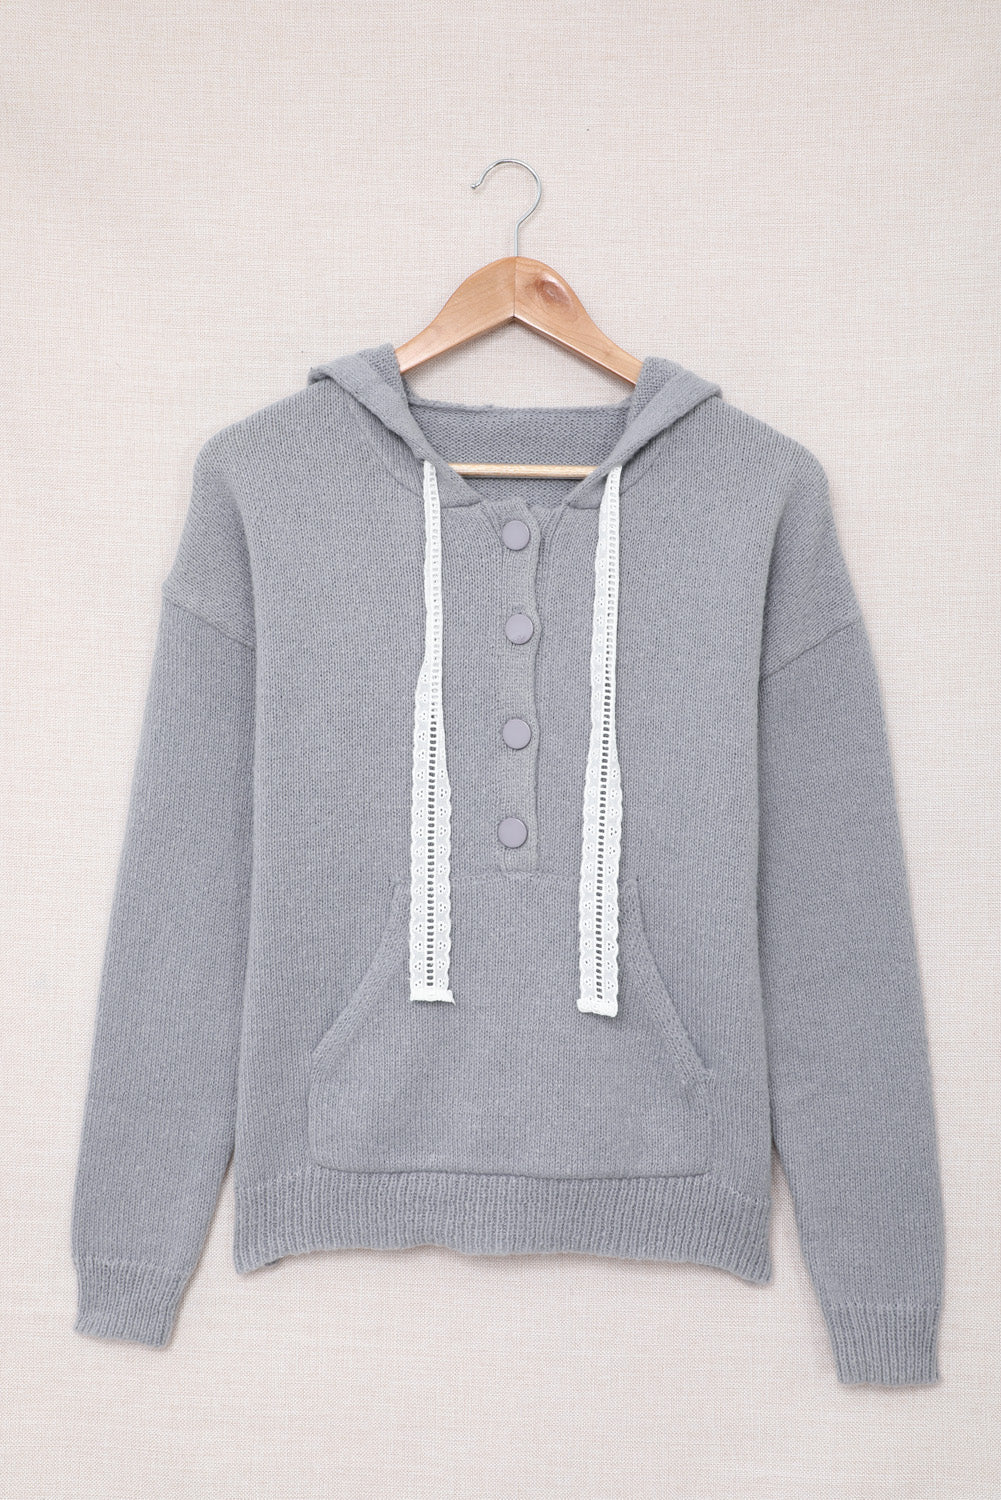 Women's Lace Trim Half-Button Drawstring Knitted Hoodie